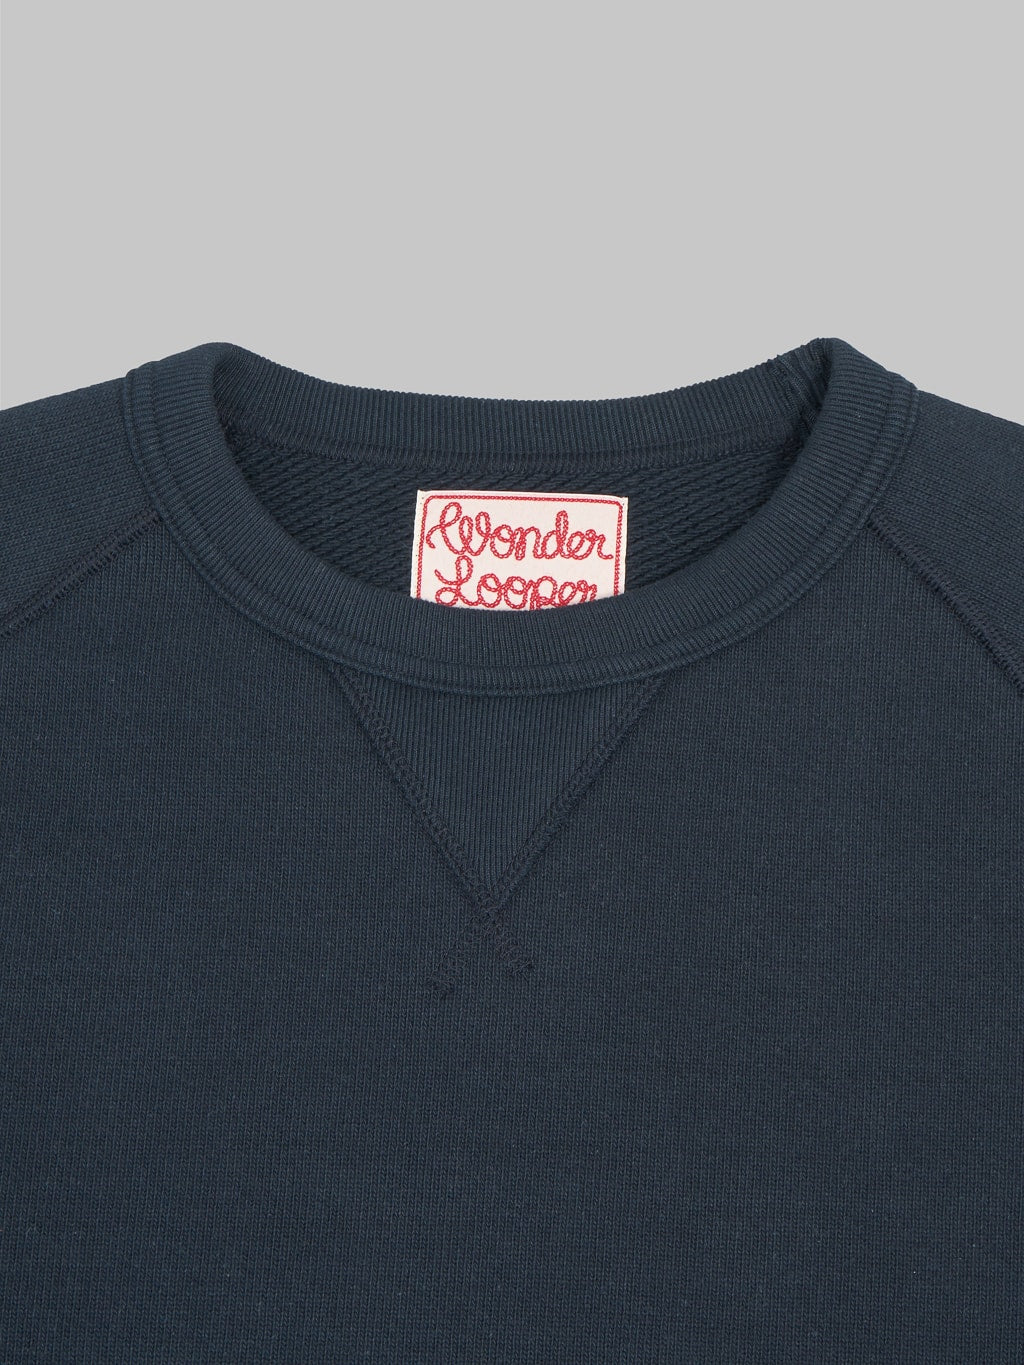 Wonder Looper Pullover Crewneck Double Heavyweight French Terry navy collar closeup